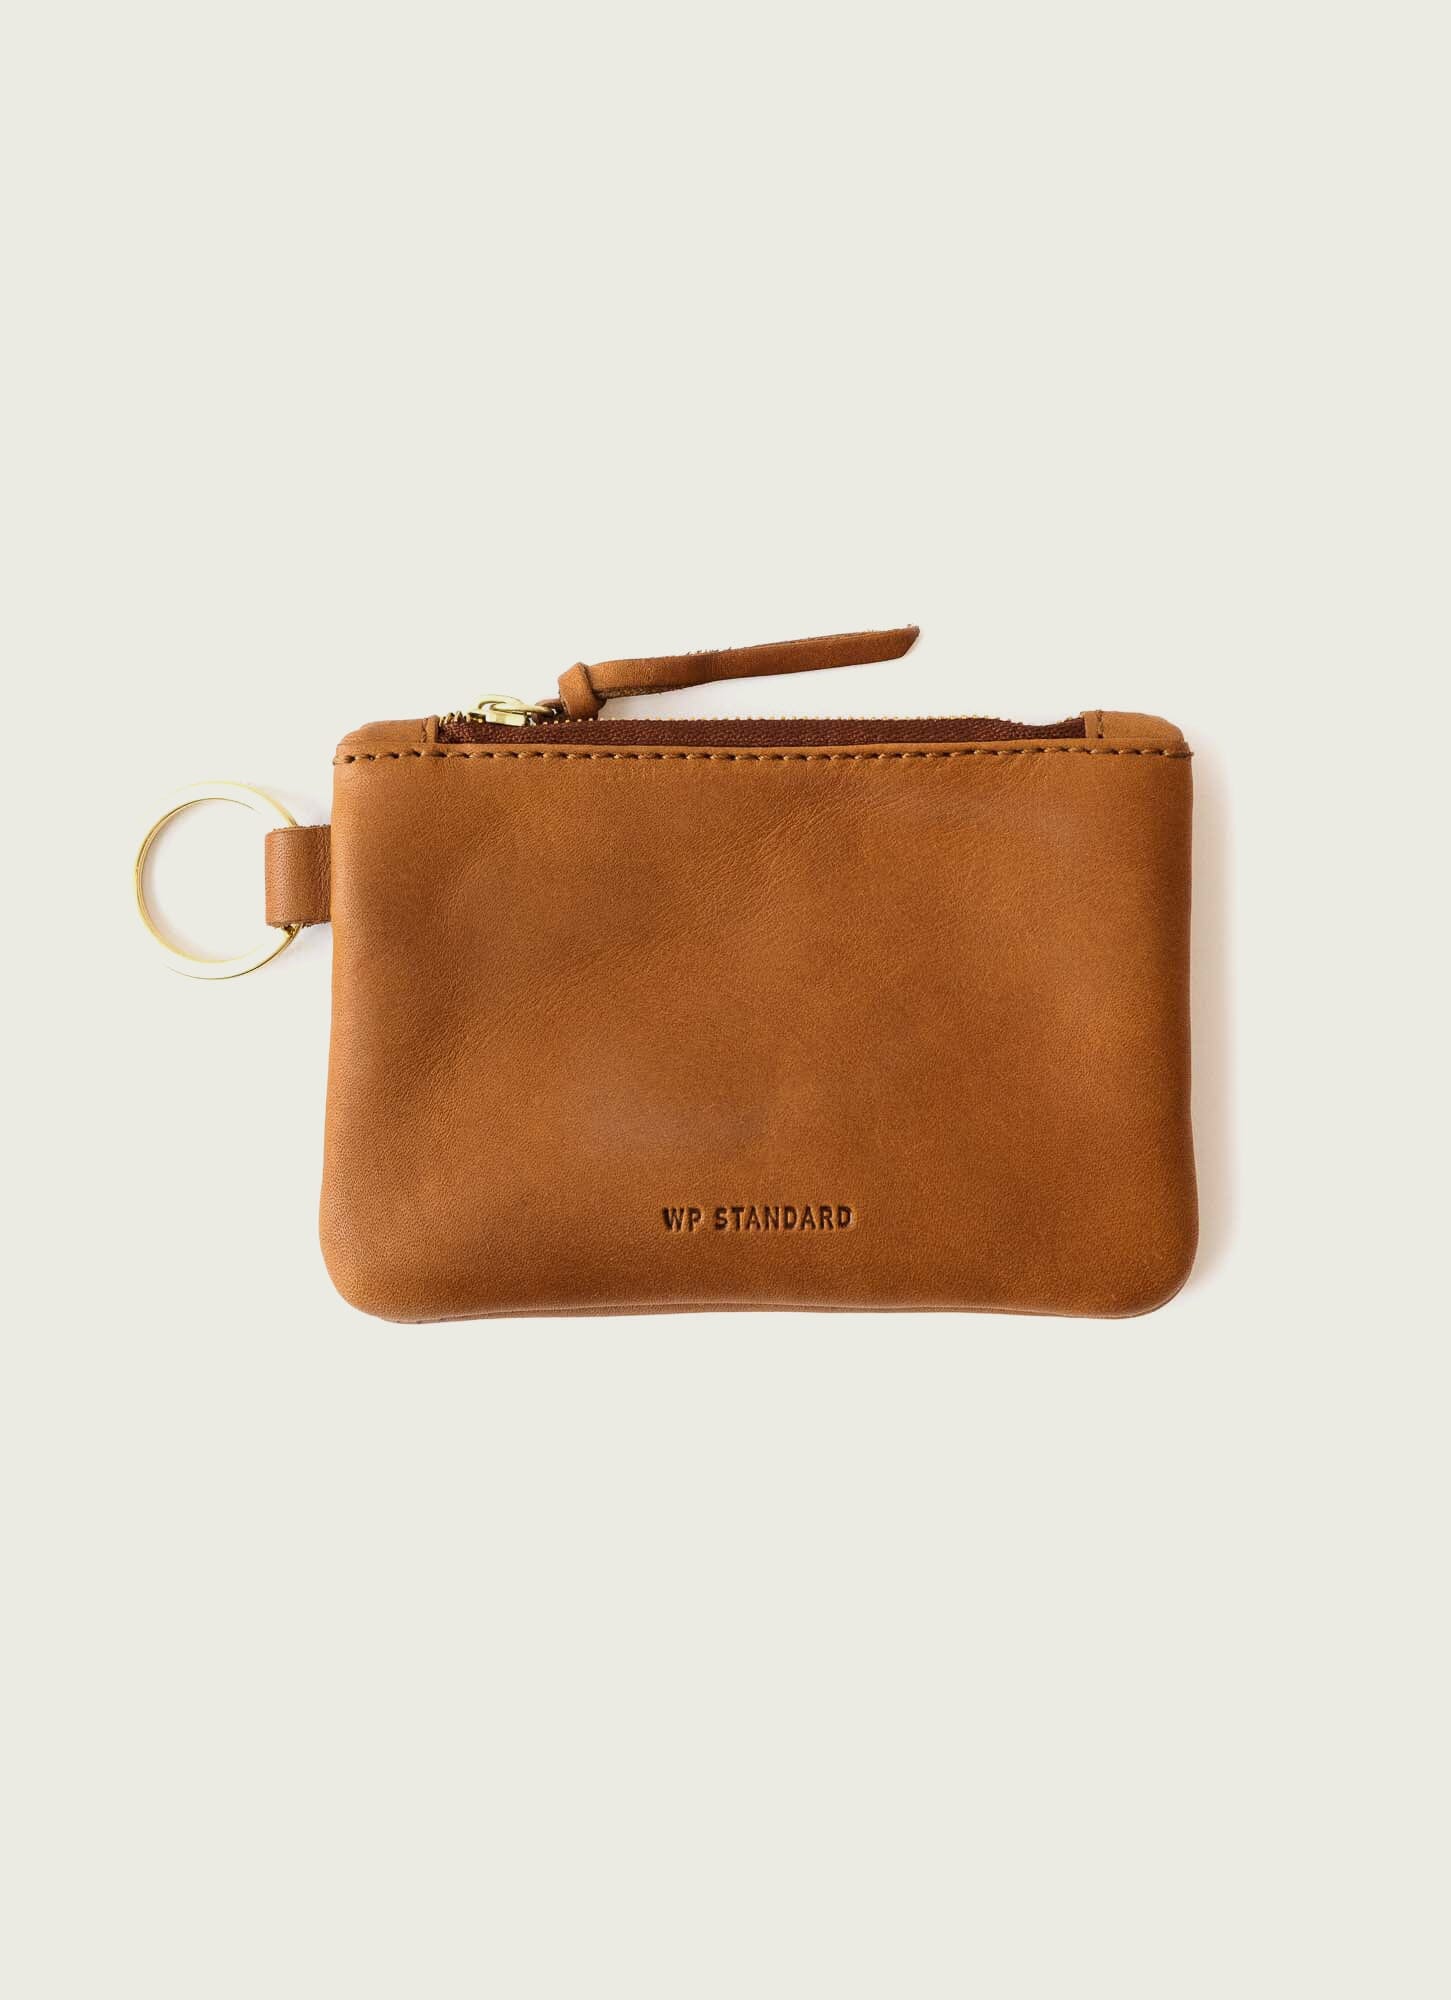 WP Standard Leather Zip Key Pouch, All Colors